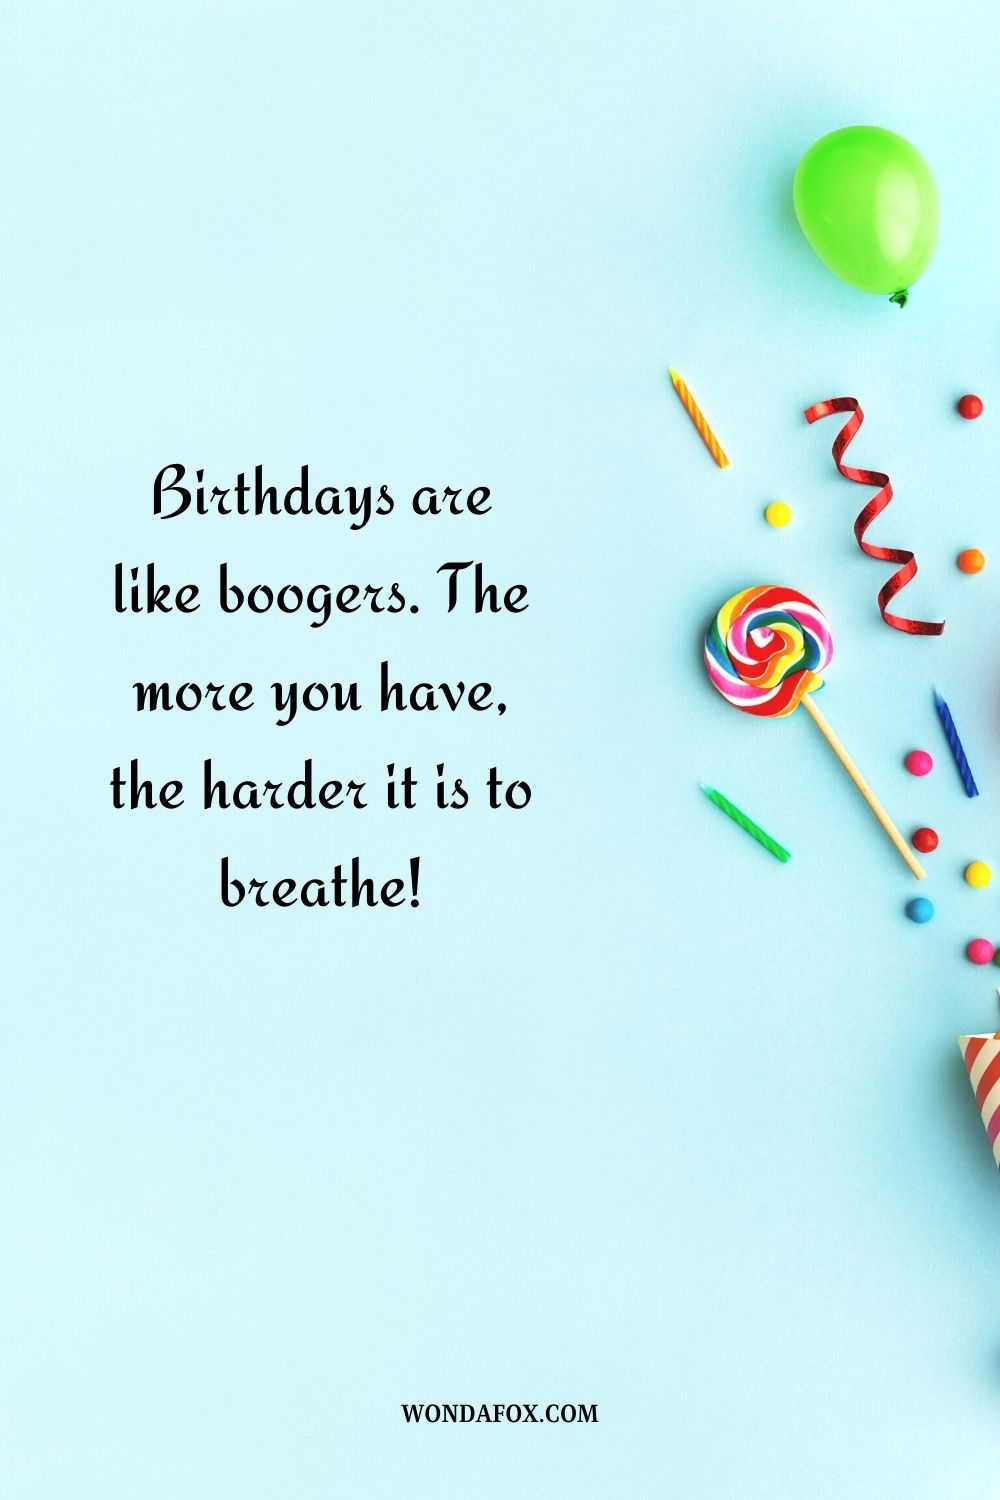 Birthdays are like boogers. The more you have, the harder it is to breathe!